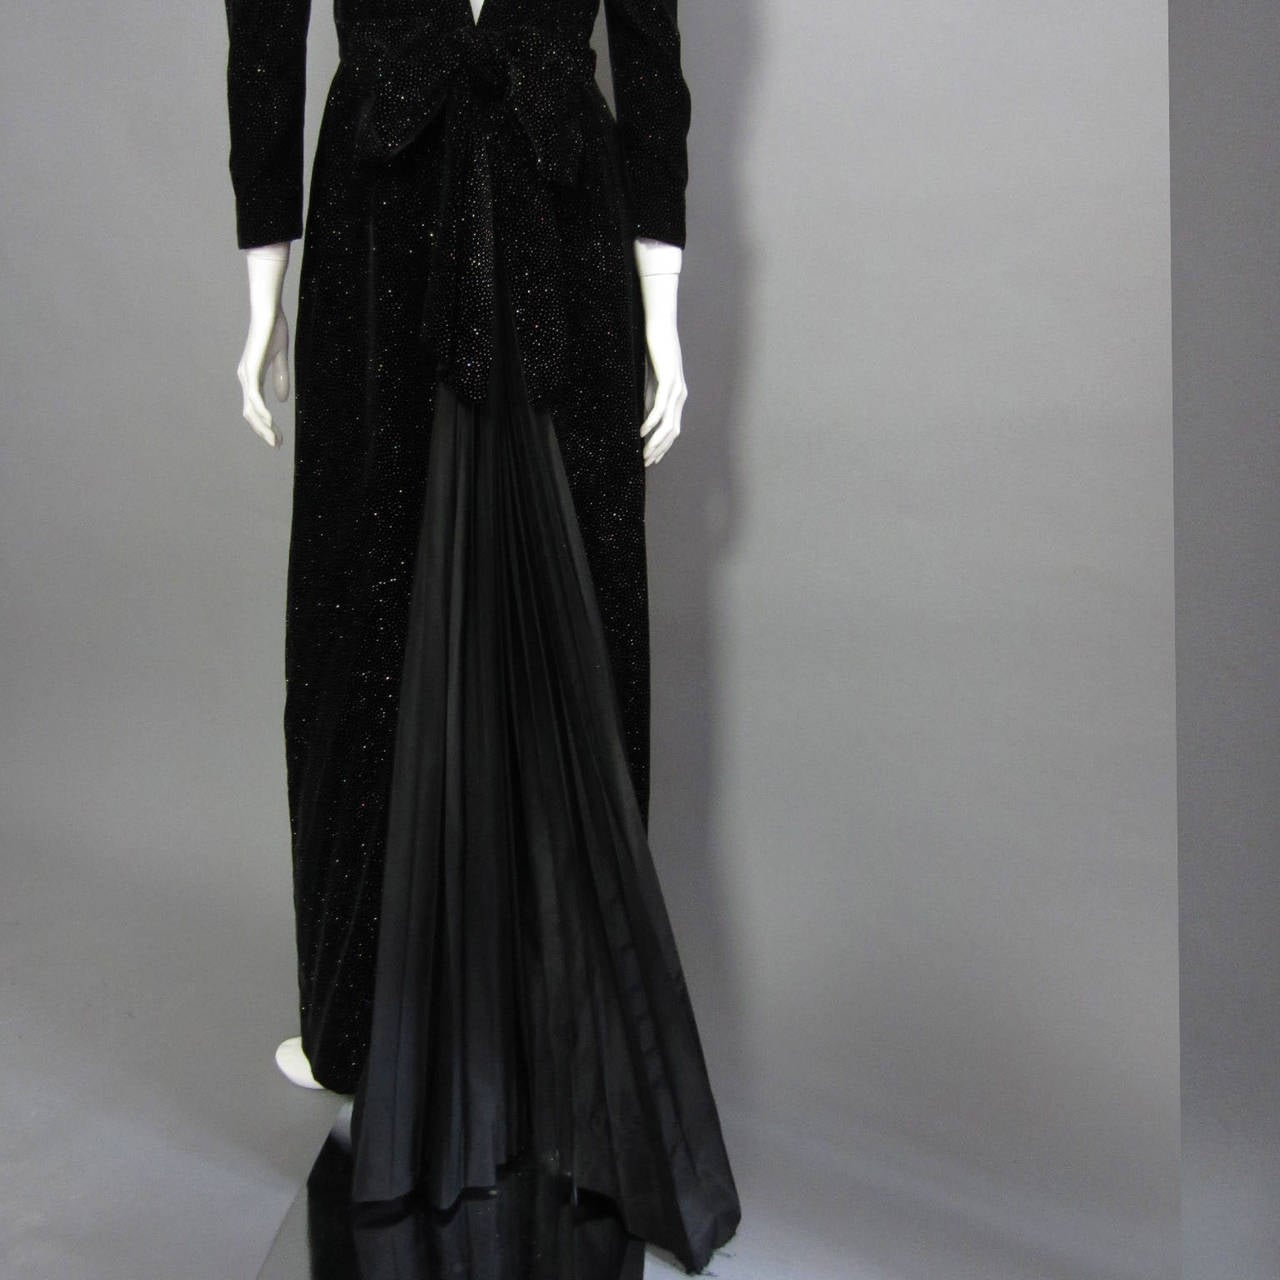 LANVIN Black Glitter Gown with Plunging Back and Bow Detail In Excellent Condition For Sale In New York, NY